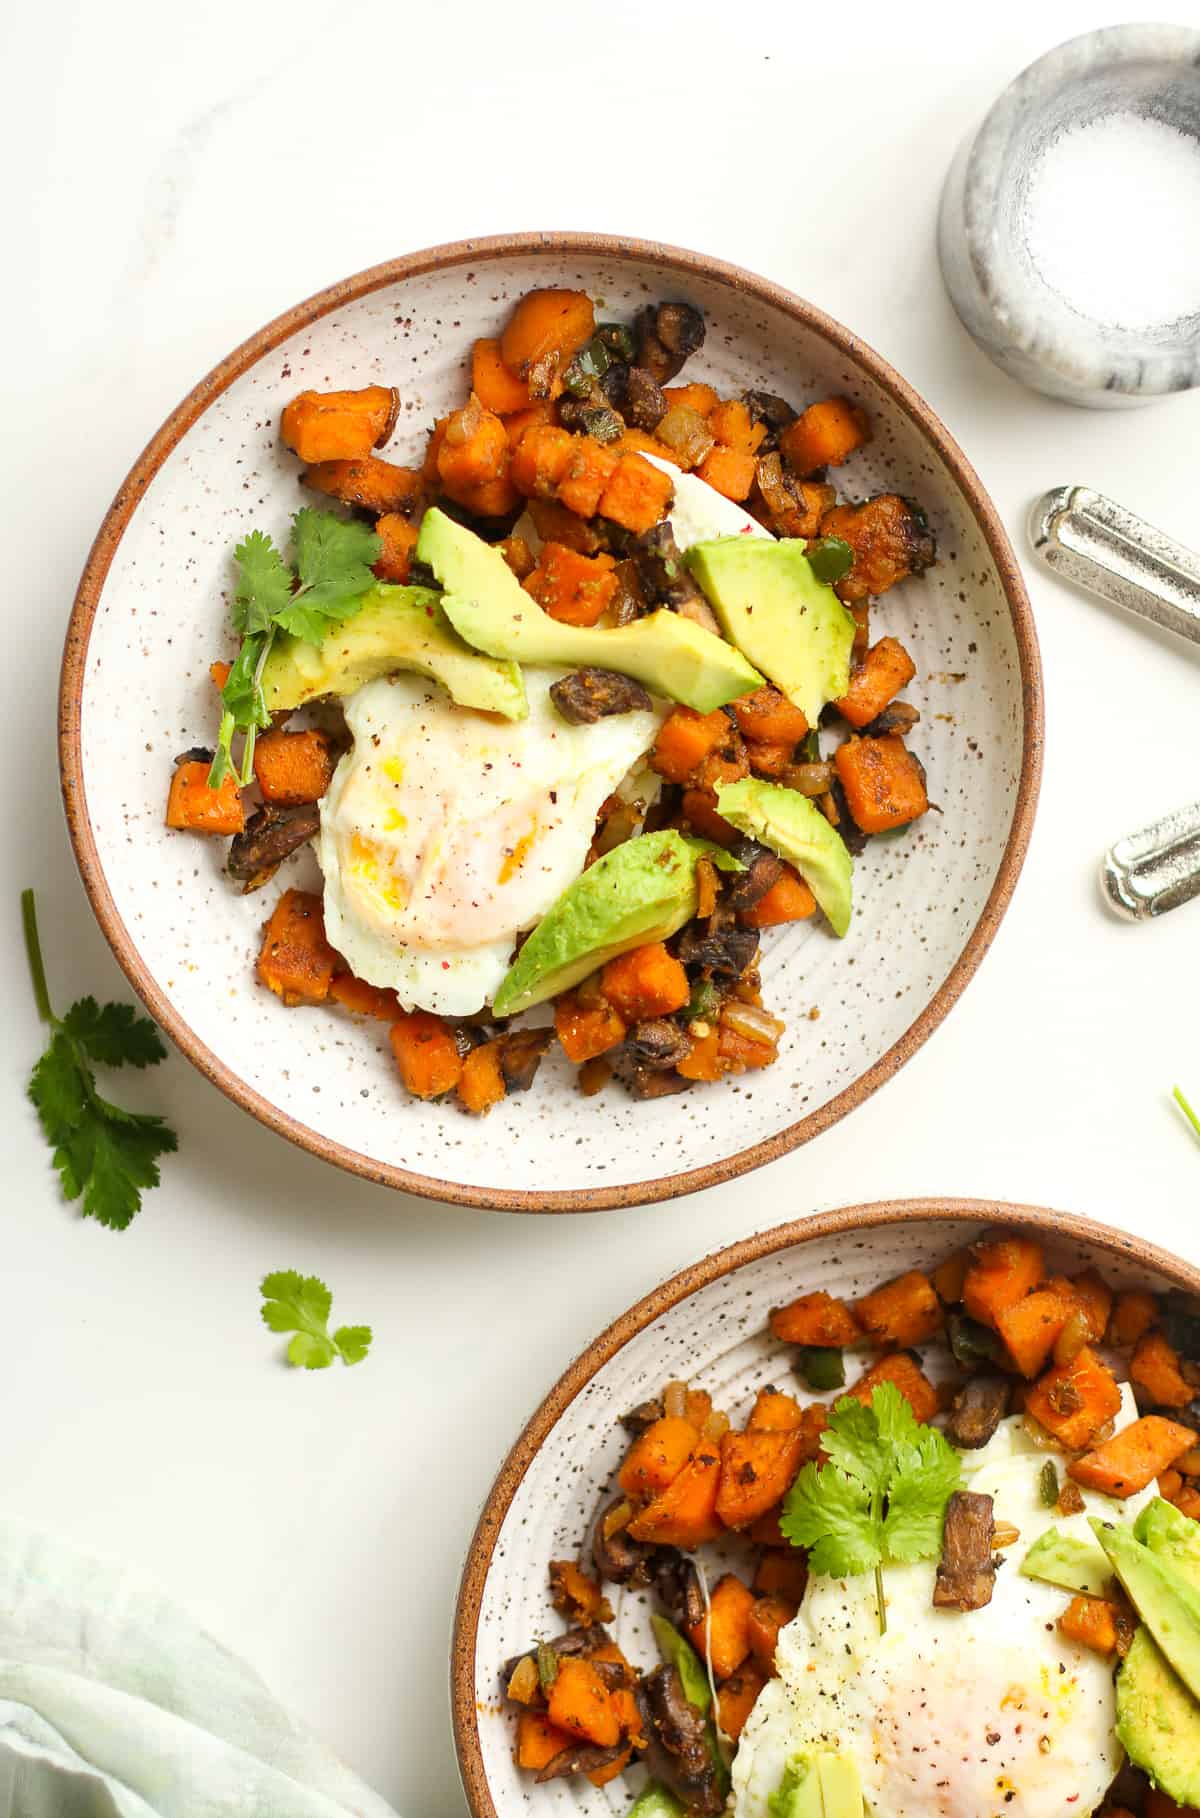 Two bowls of the sweet potato hash with the soft eggs on top.